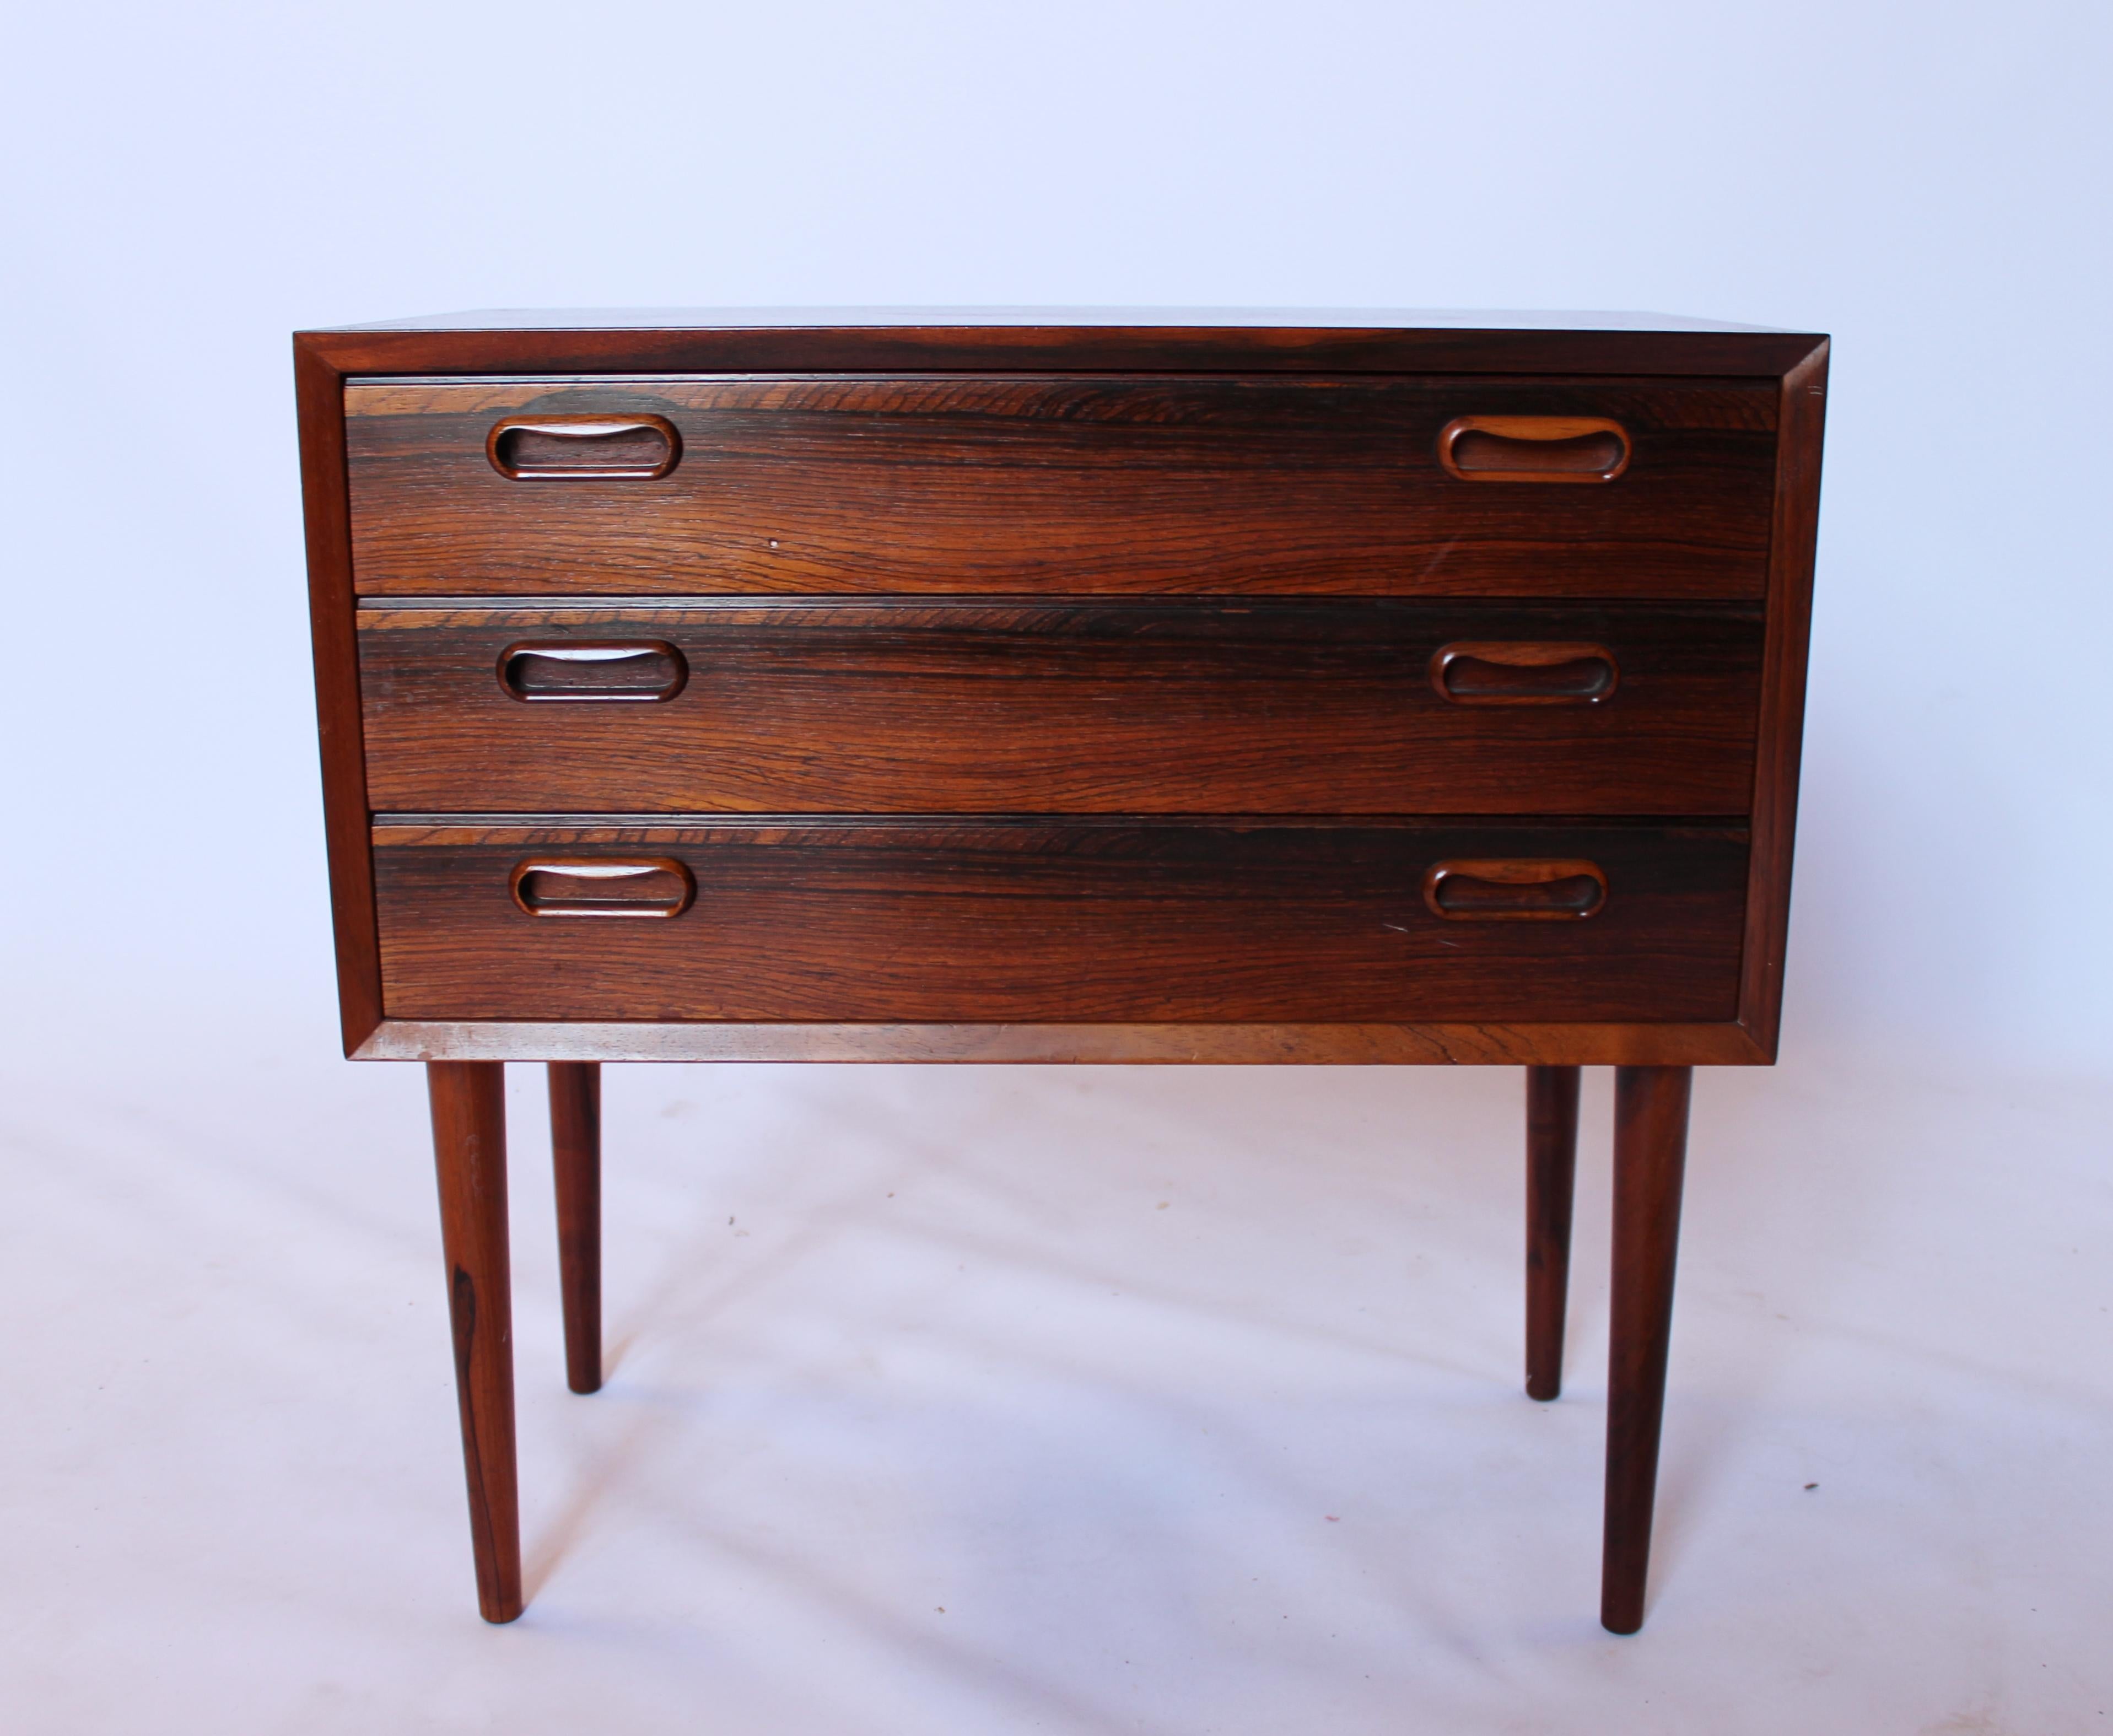 Scandinavian Modern Set of Bedside Tables or Chests in Rosewood of Danish Design from the 1960s